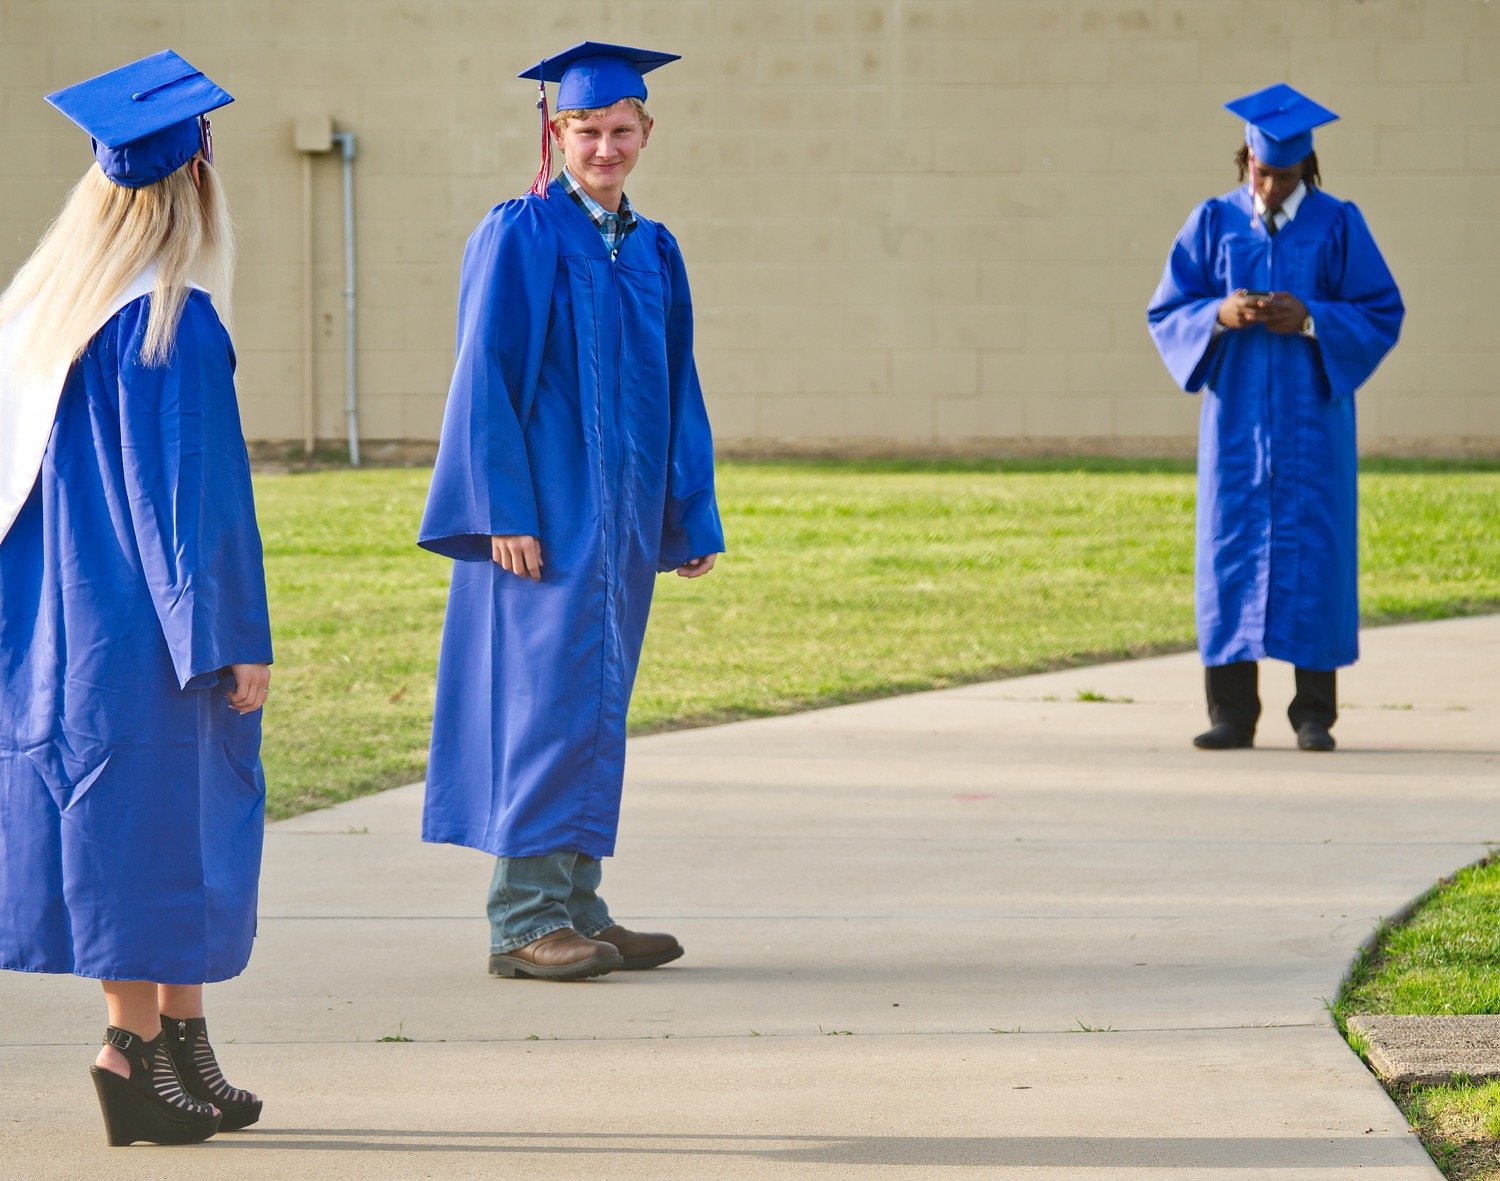 Quitman seniors, from left, Savannah Breding, Larry Blankenship and Trey Berry keep appropriate distance Monday evening as they wait outside Bud Moody Stadium to walk for the school’s virtual graduation to be shown on May 22.